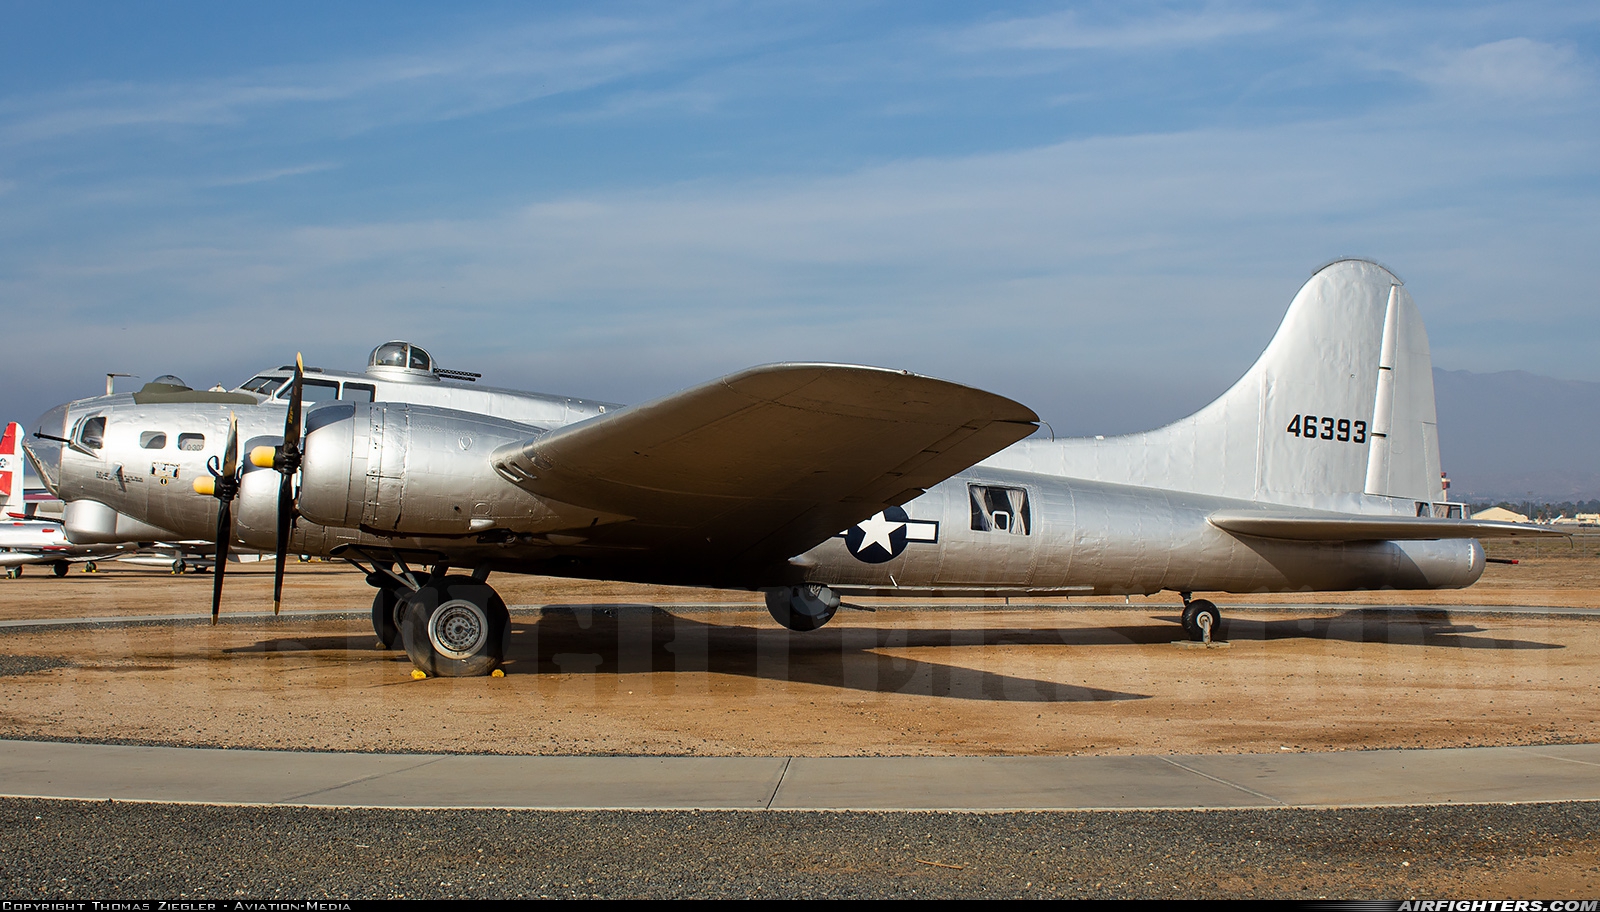 USA - Army Air Force Boeing B-17G Flying Fortress (299P) 44-6393 at Riverside - March ARB (AFB / Field) (RIV / KRIV), USA